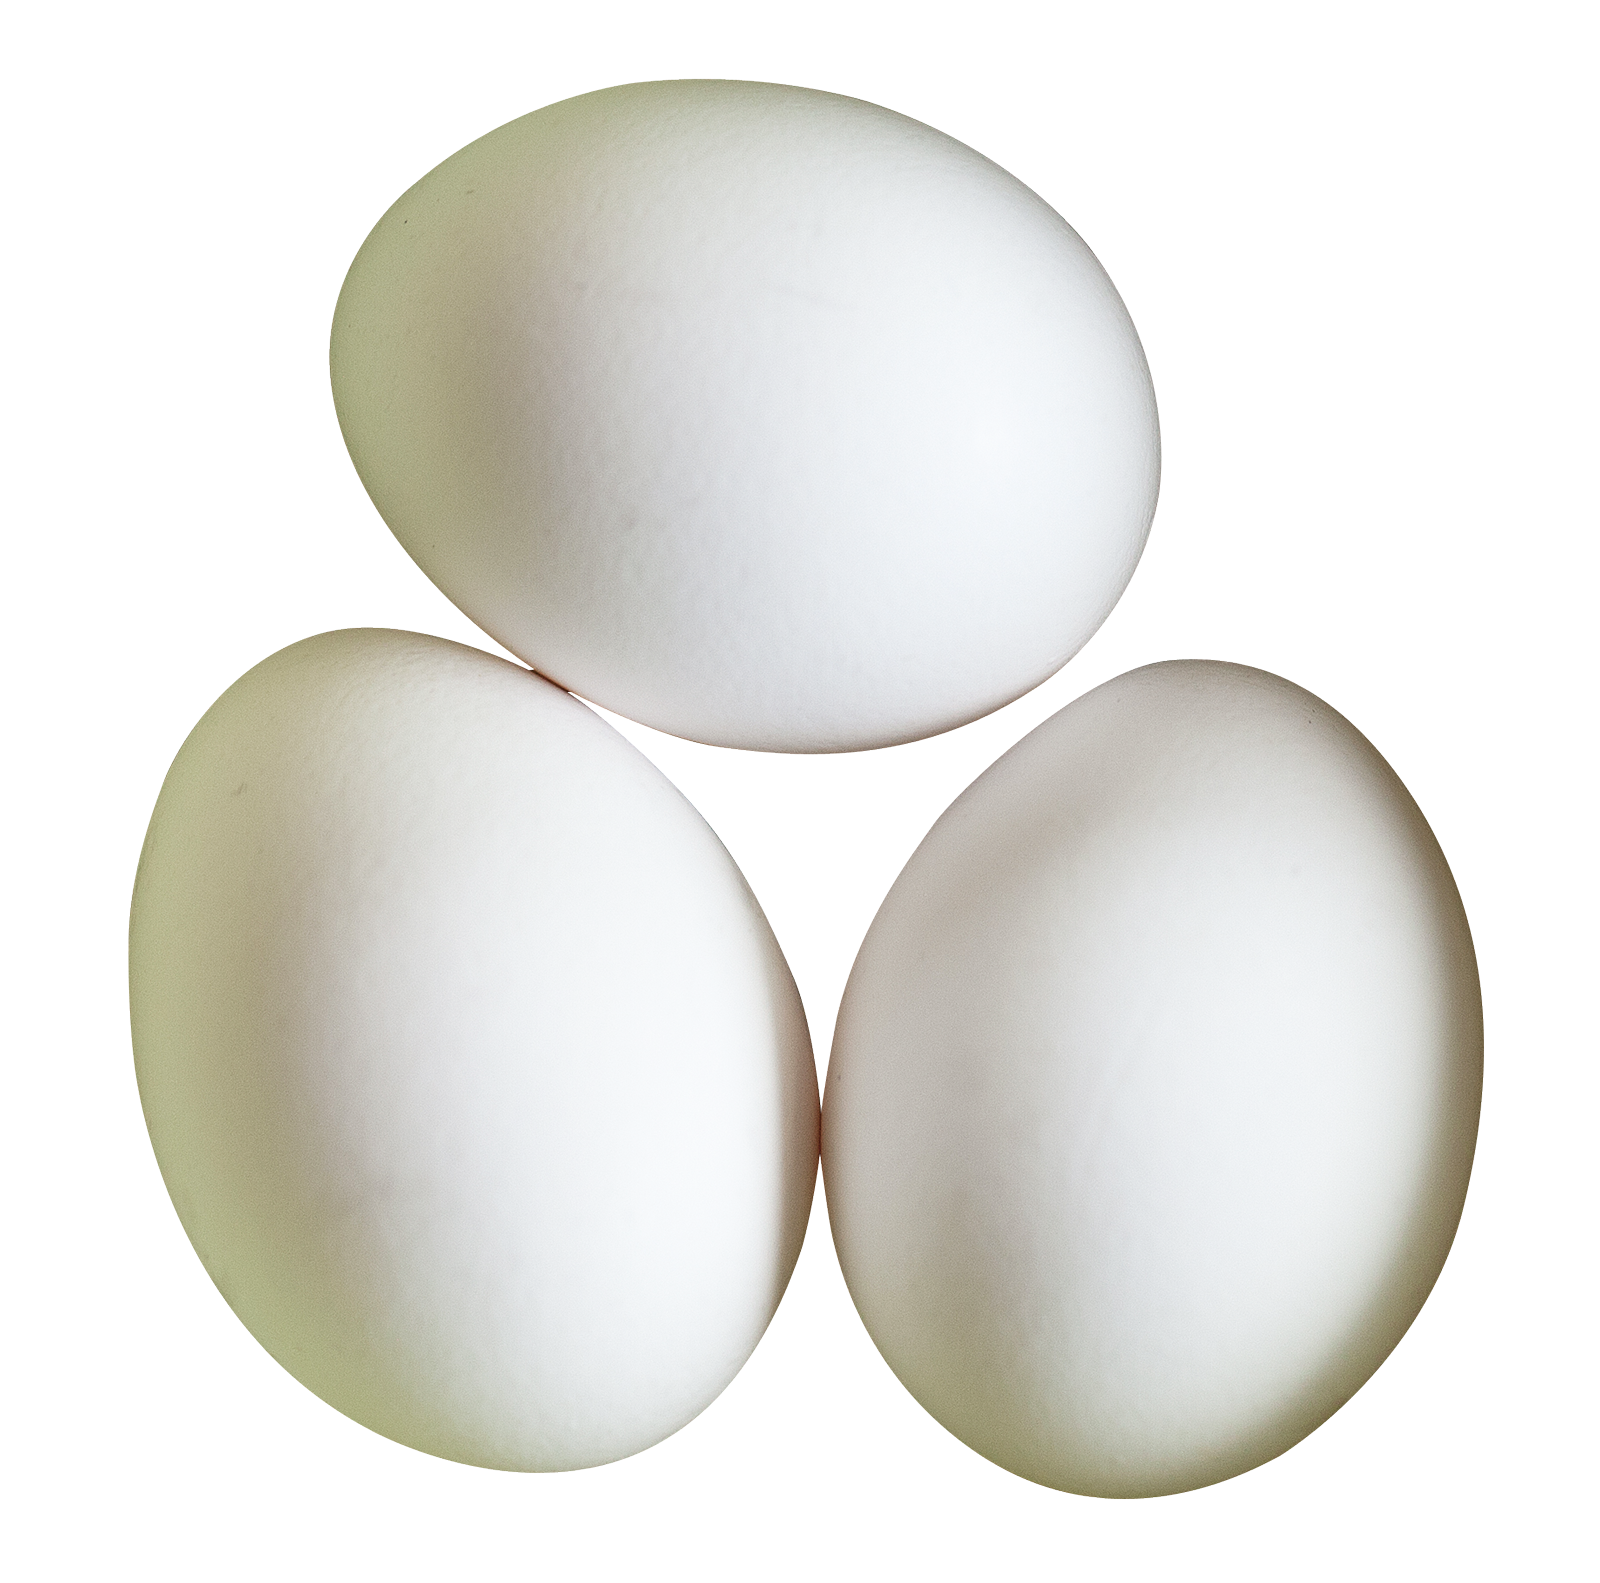 Three White Eggson Gray Background PNG